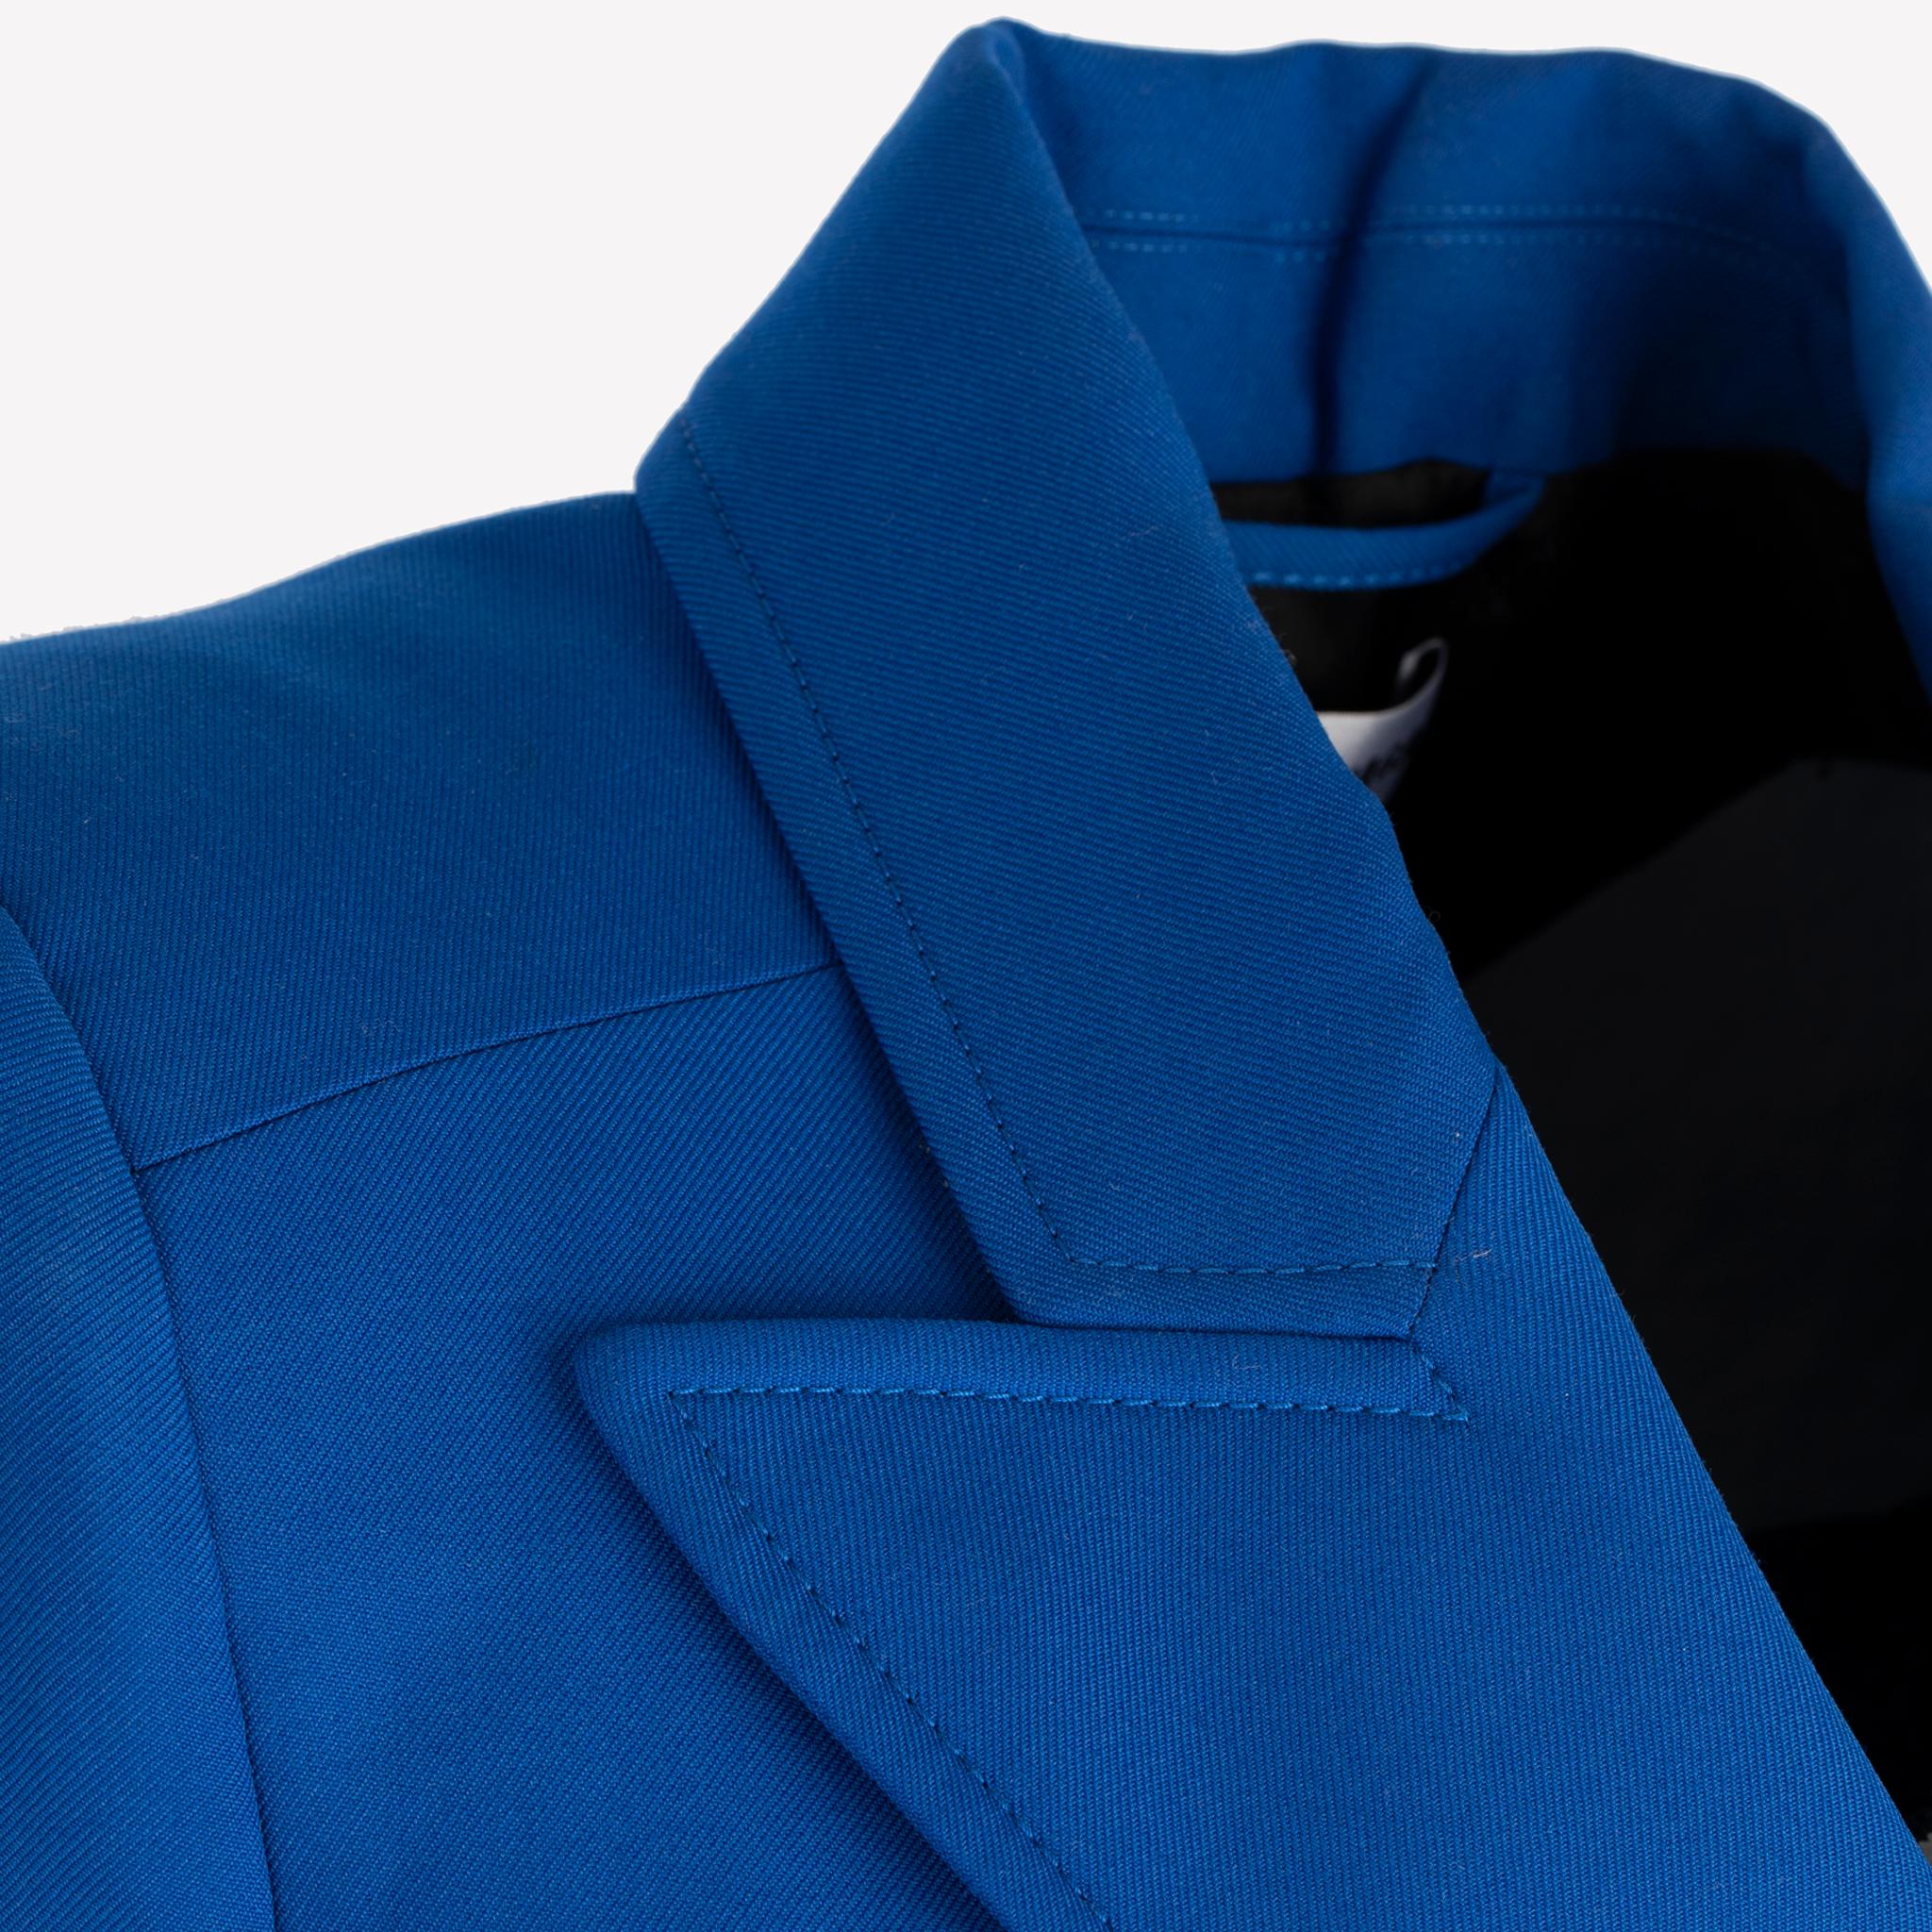 Balenciaga Hourglass Double Breasted Wool Blend Coat Royal Blue 38 FR For Sale 1